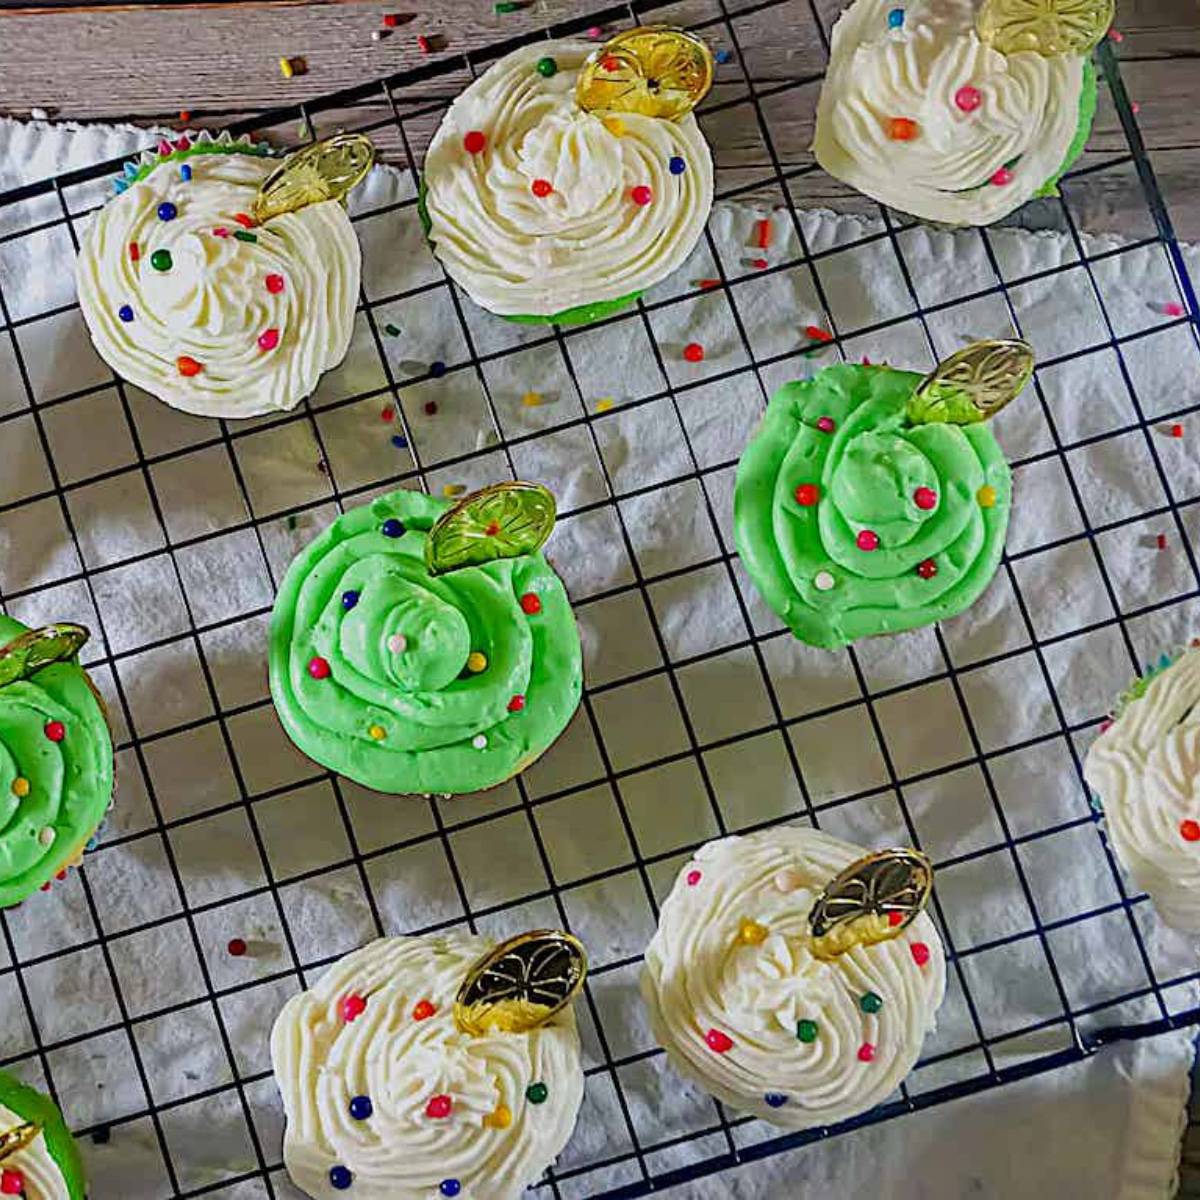 st. patrick's day cupcakes with white and green frosting and rainbow sprinkles on a cooling rack